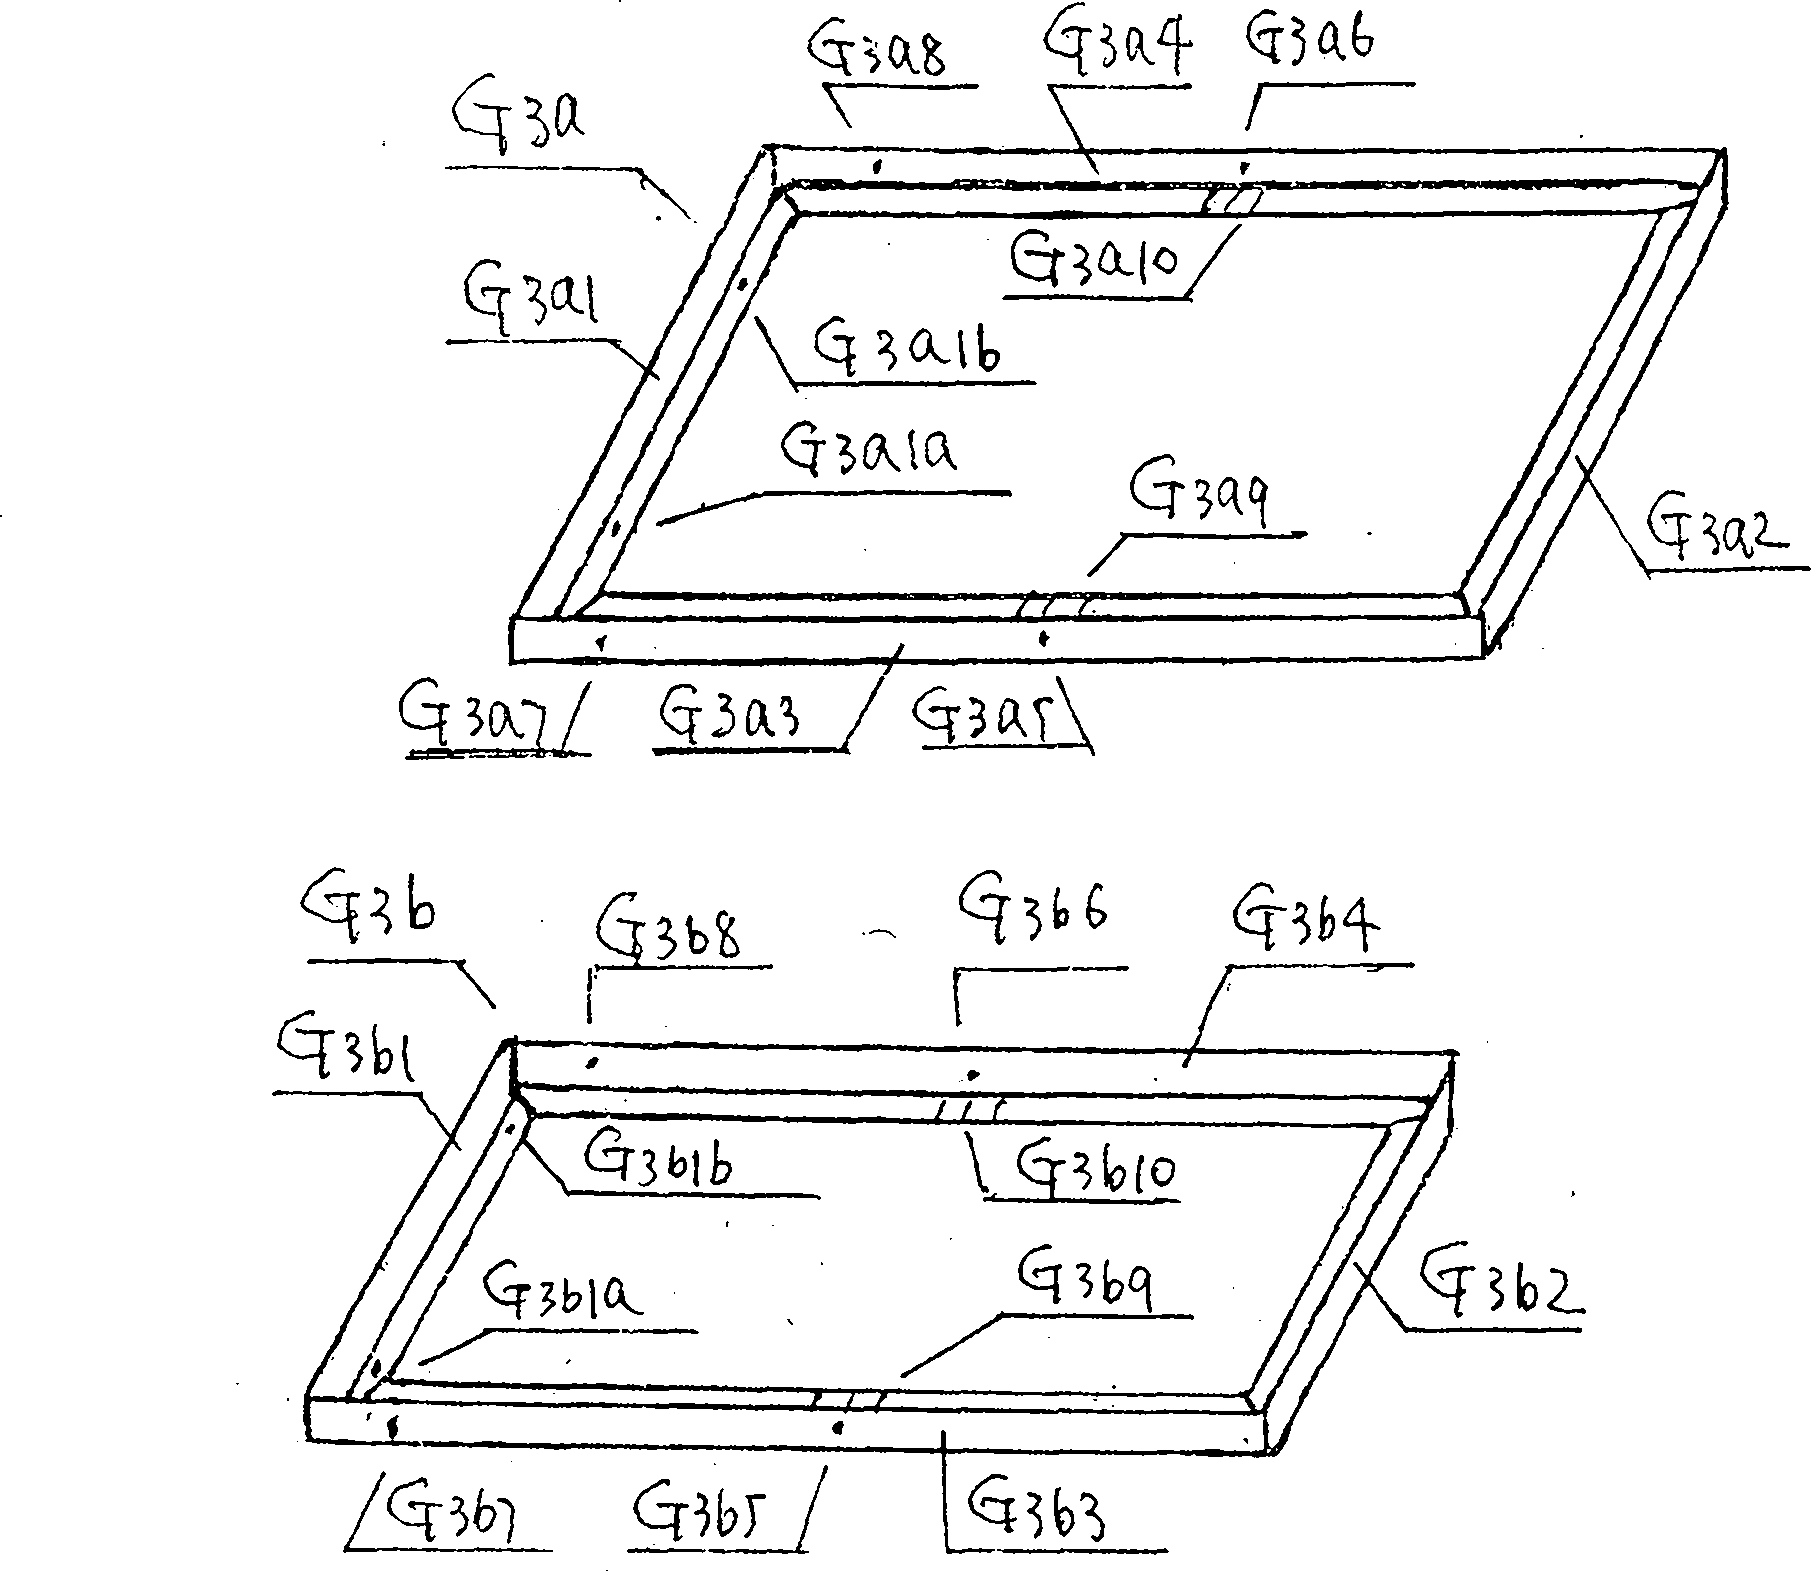 Novel method for manufacturing dual-purpose berth and writing desk combination structure